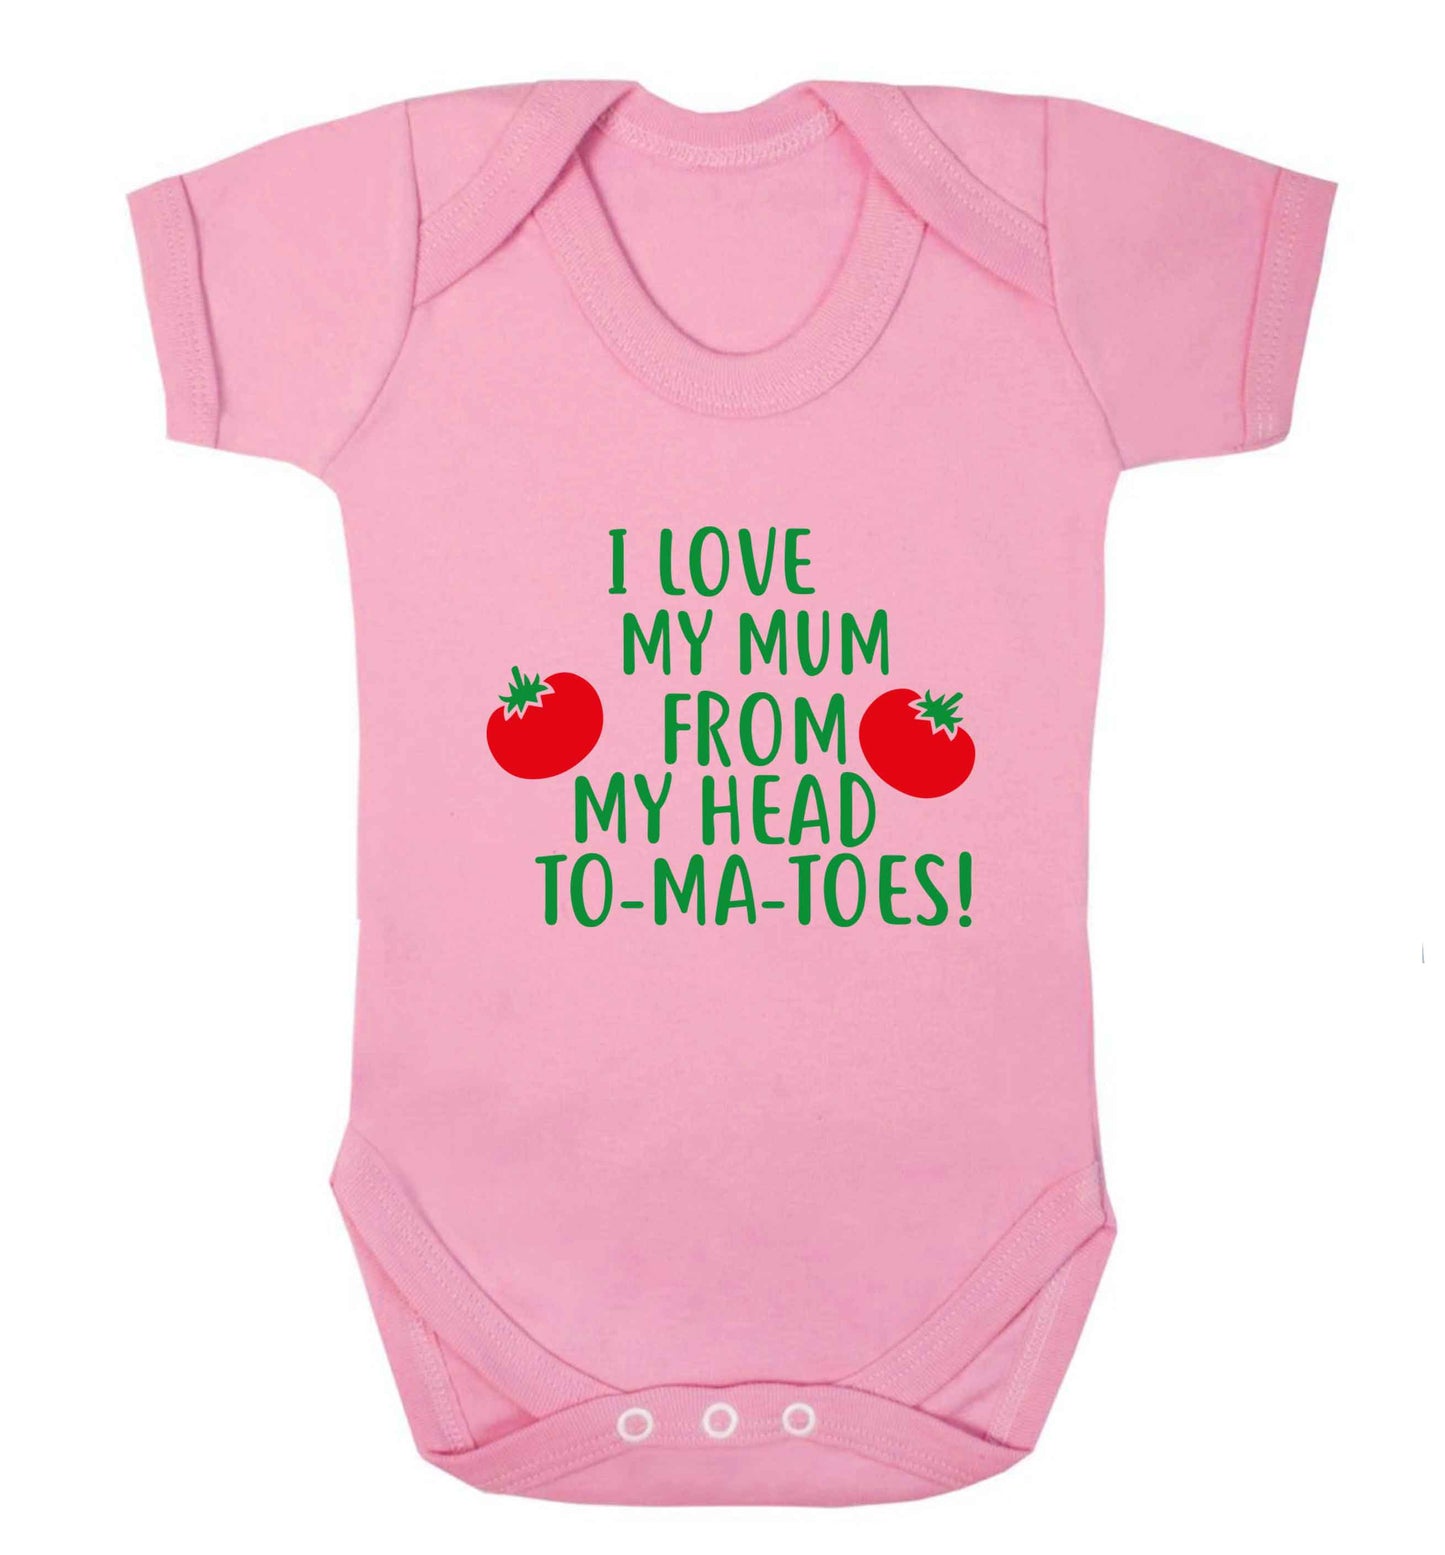 I love my mum from my head to-my-toes! baby vest pale pink 18-24 months